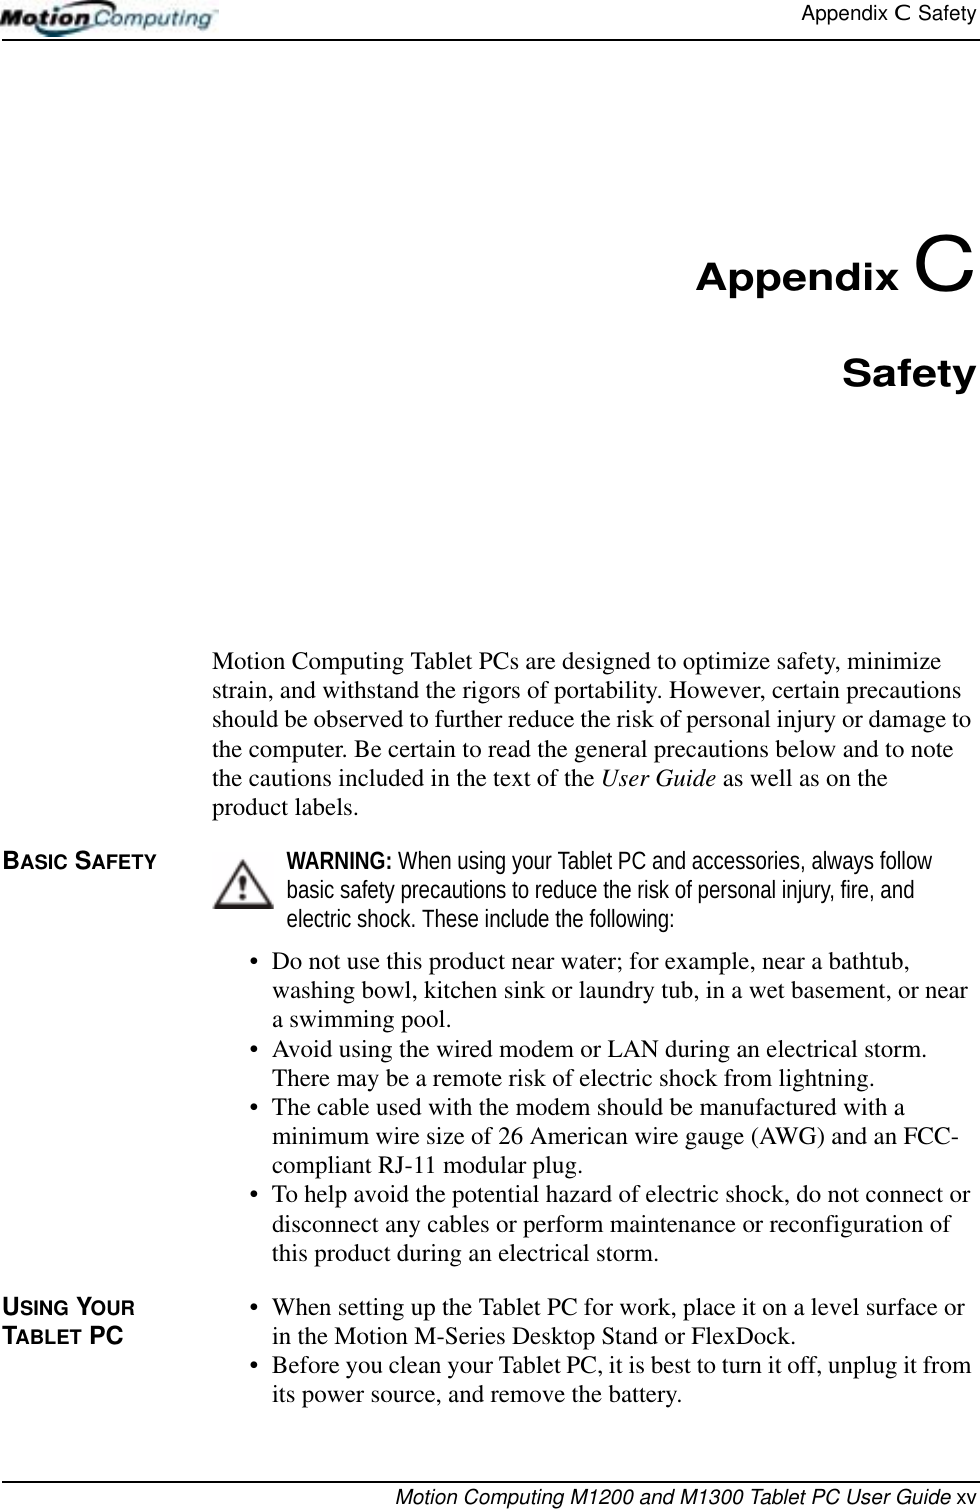 Appendix C  SafetyMotion Computing M1200 and M1300 Tablet PC User Guide xvAppendix CSafetyMotion Computing Tablet PCs are designed to optimize safety, minimize strain, and withstand the rigors of portability. However, certain precautions should be observed to further reduce the risk of personal injury or damage to the computer. Be certain to read the general precautions below and to note the cautions included in the text of the User Guide as well as on the product labels.BASIC SAFETY WARNING: When using your Tablet PC and accessories, always follow basic safety precautions to reduce the risk of personal injury, fire, and electric shock. These include the following:• Do not use this product near water; for example, near a bathtub, washing bowl, kitchen sink or laundry tub, in a wet basement, or near a swimming pool.• Avoid using the wired modem or LAN during an electrical storm. There may be a remote risk of electric shock from lightning.• The cable used with the modem should be manufactured with a minimum wire size of 26 American wire gauge (AWG) and an FCC-compliant RJ-11 modular plug.• To help avoid the potential hazard of electric shock, do not connect or disconnect any cables or perform maintenance or reconfiguration of this product during an electrical storm.USING YOUR TABLET PC • When setting up the Tablet PC for work, place it on a level surface or in the Motion M-Series Desktop Stand or FlexDock.• Before you clean your Tablet PC, it is best to turn it off, unplug it from its power source, and remove the battery. 